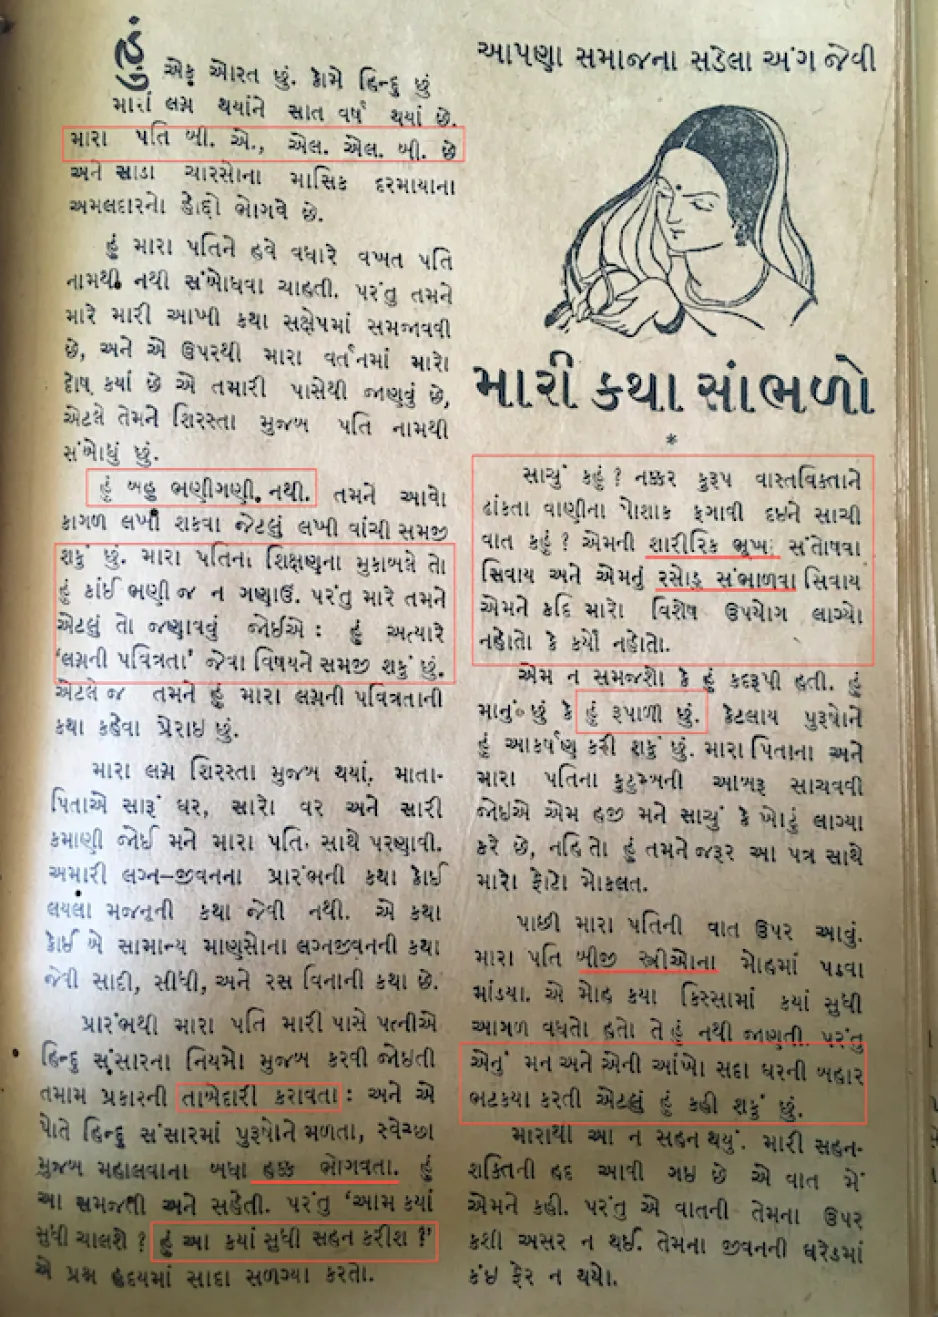 An article from an issue of Strijivan in 1947.